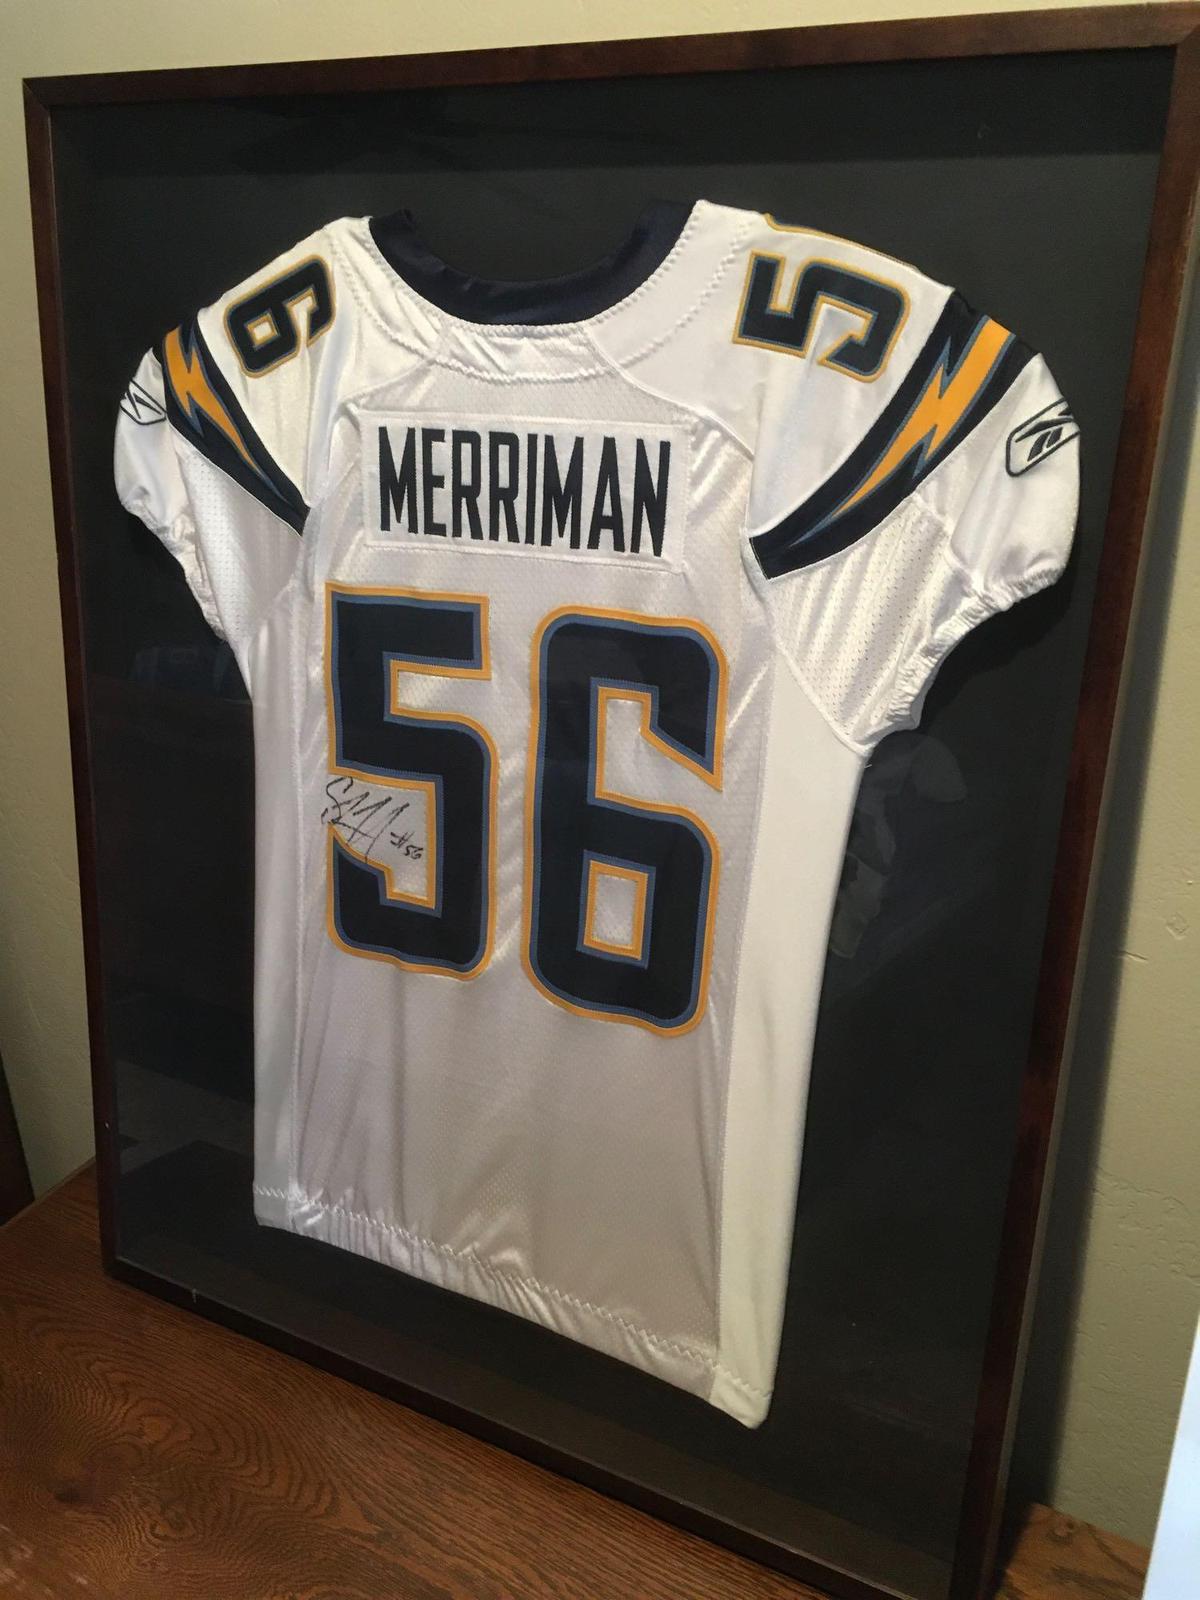 San Diego Chargers Shawne Merriman Linebacker Signed Jersey - Framed 41" t x 33" w x 2" d